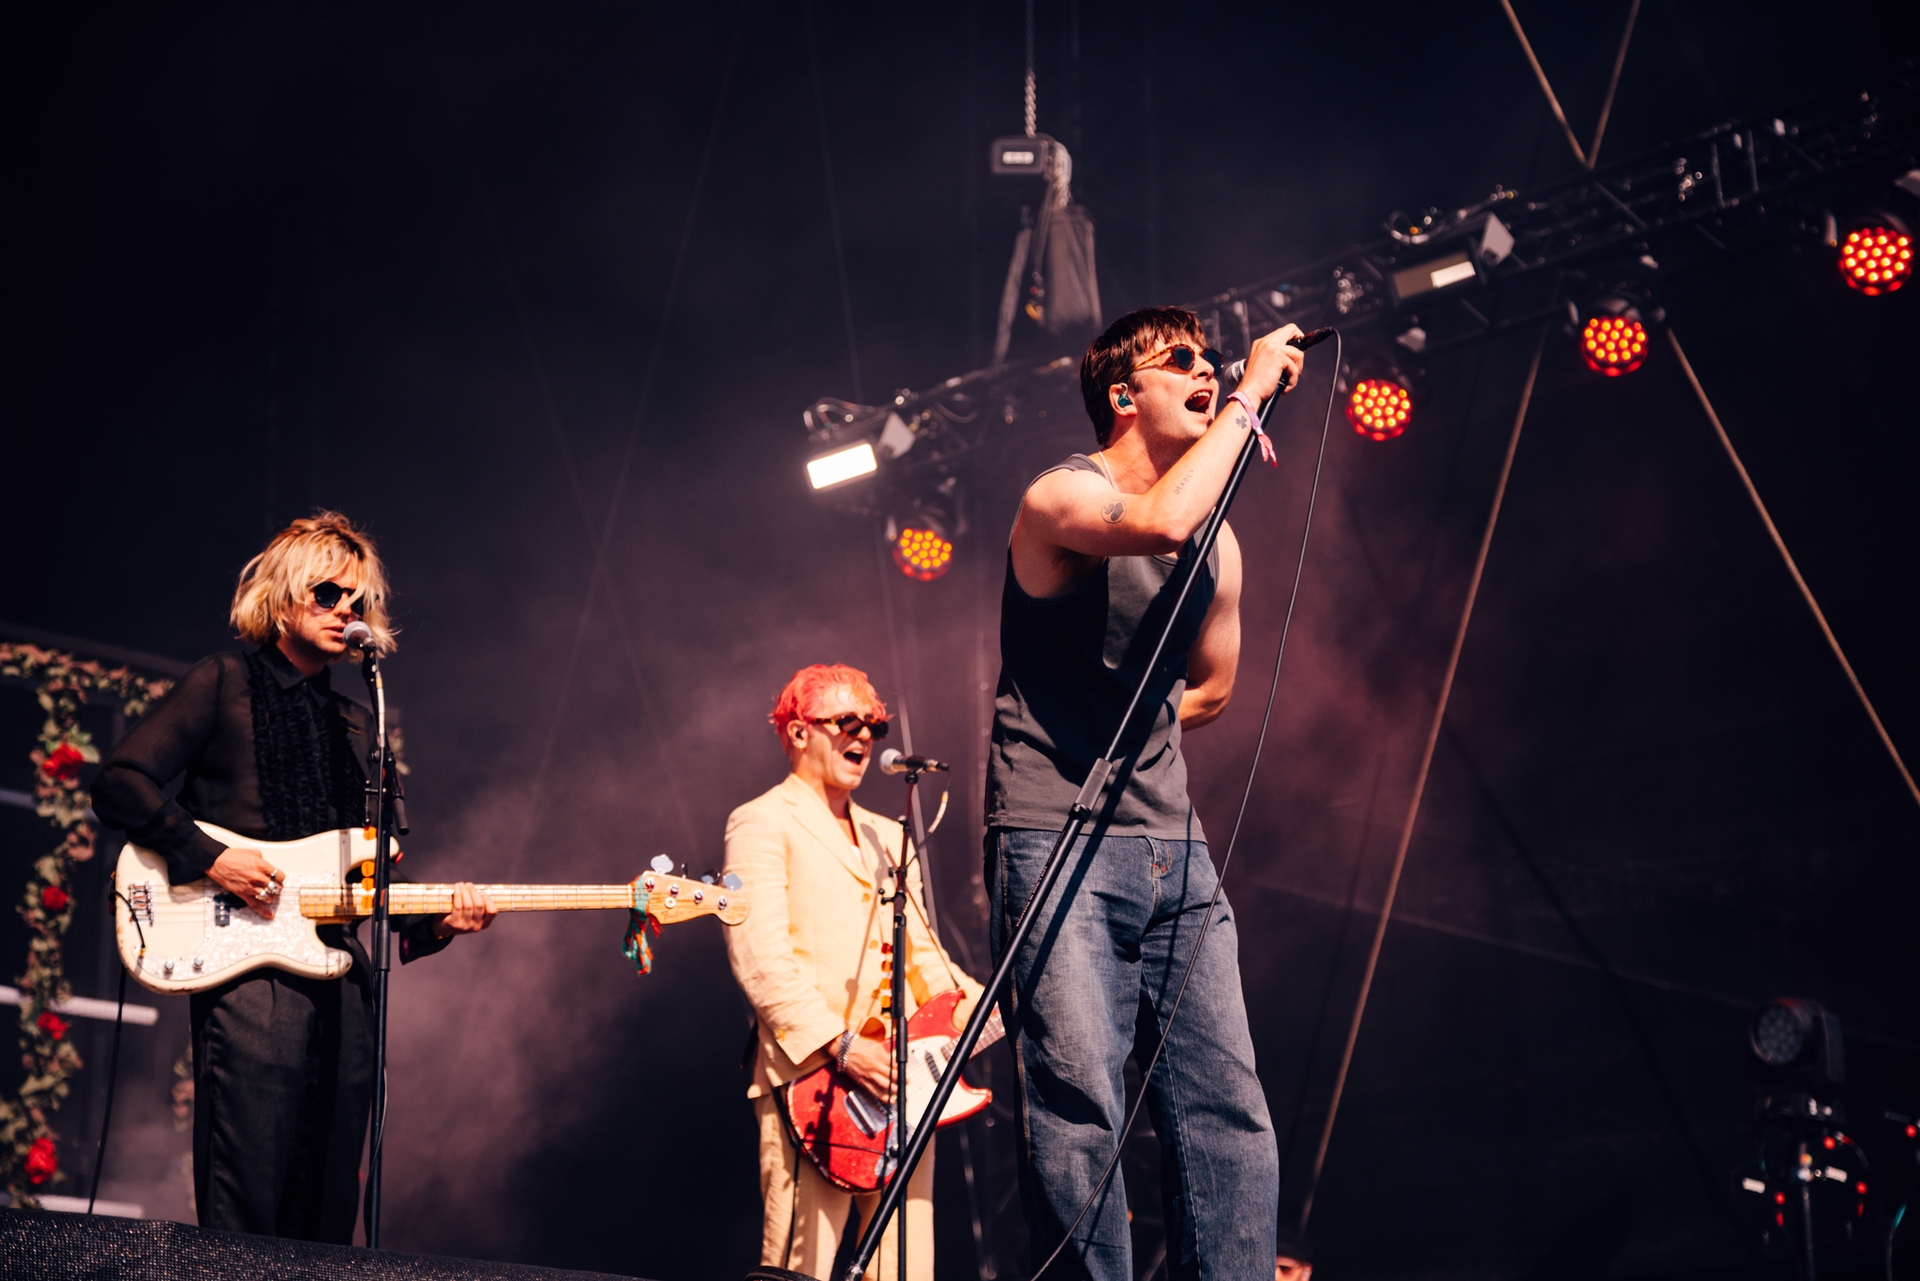 Fontaines D.C. were among the main stage acts on Saturday. (Image: TRNSMT)